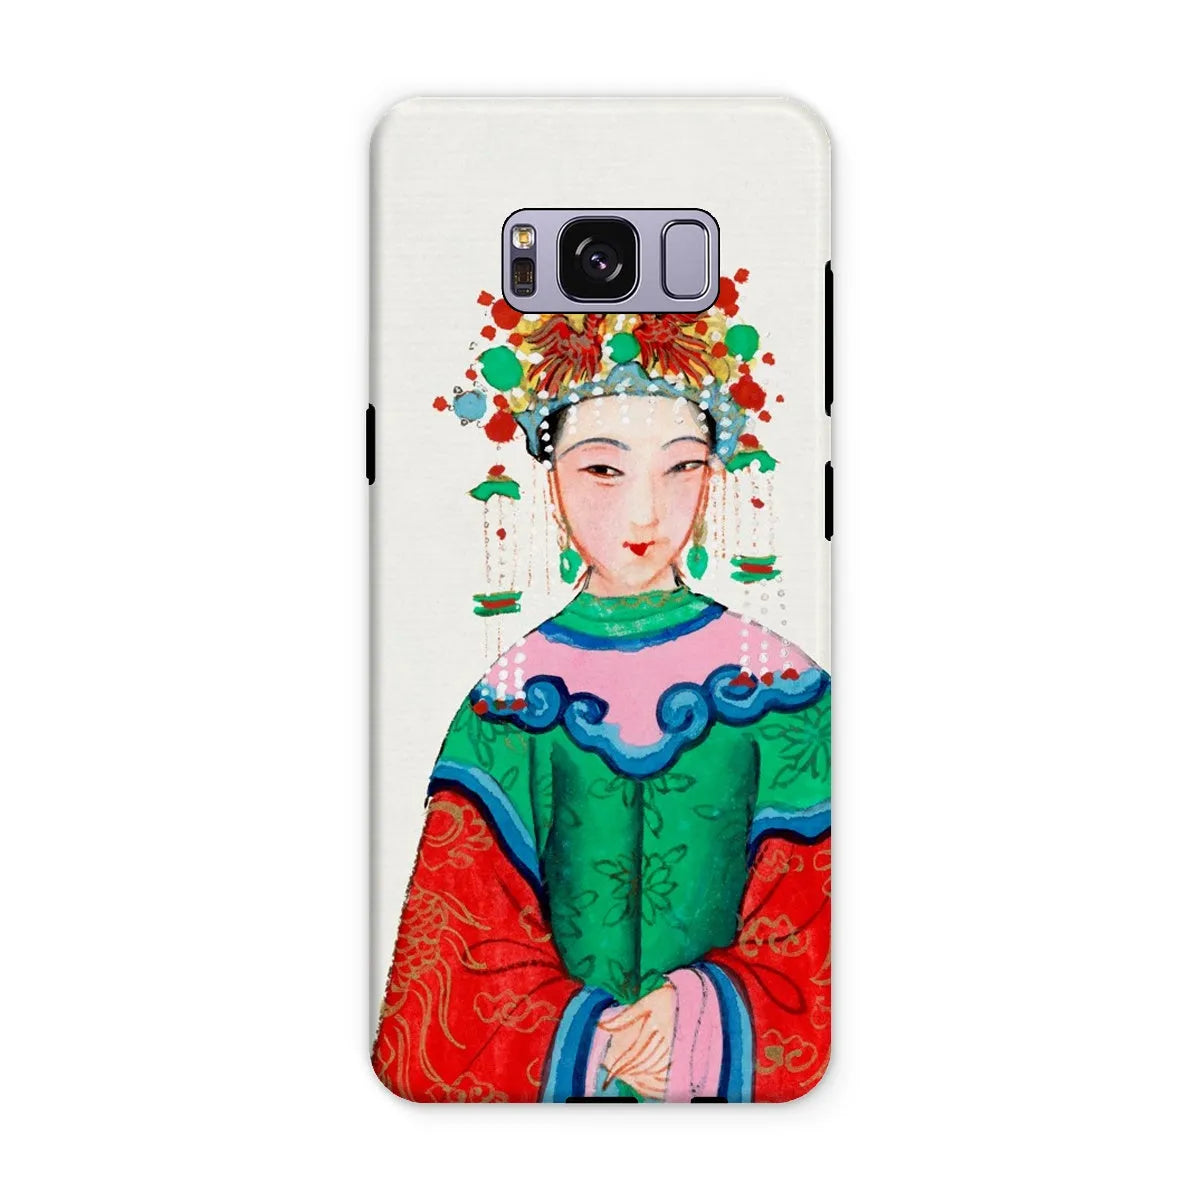 Imperial Princess - Chinese Aesthetic Painting Phone Case - Samsung Galaxy S8 Plus / Matte - Mobile Phone Cases